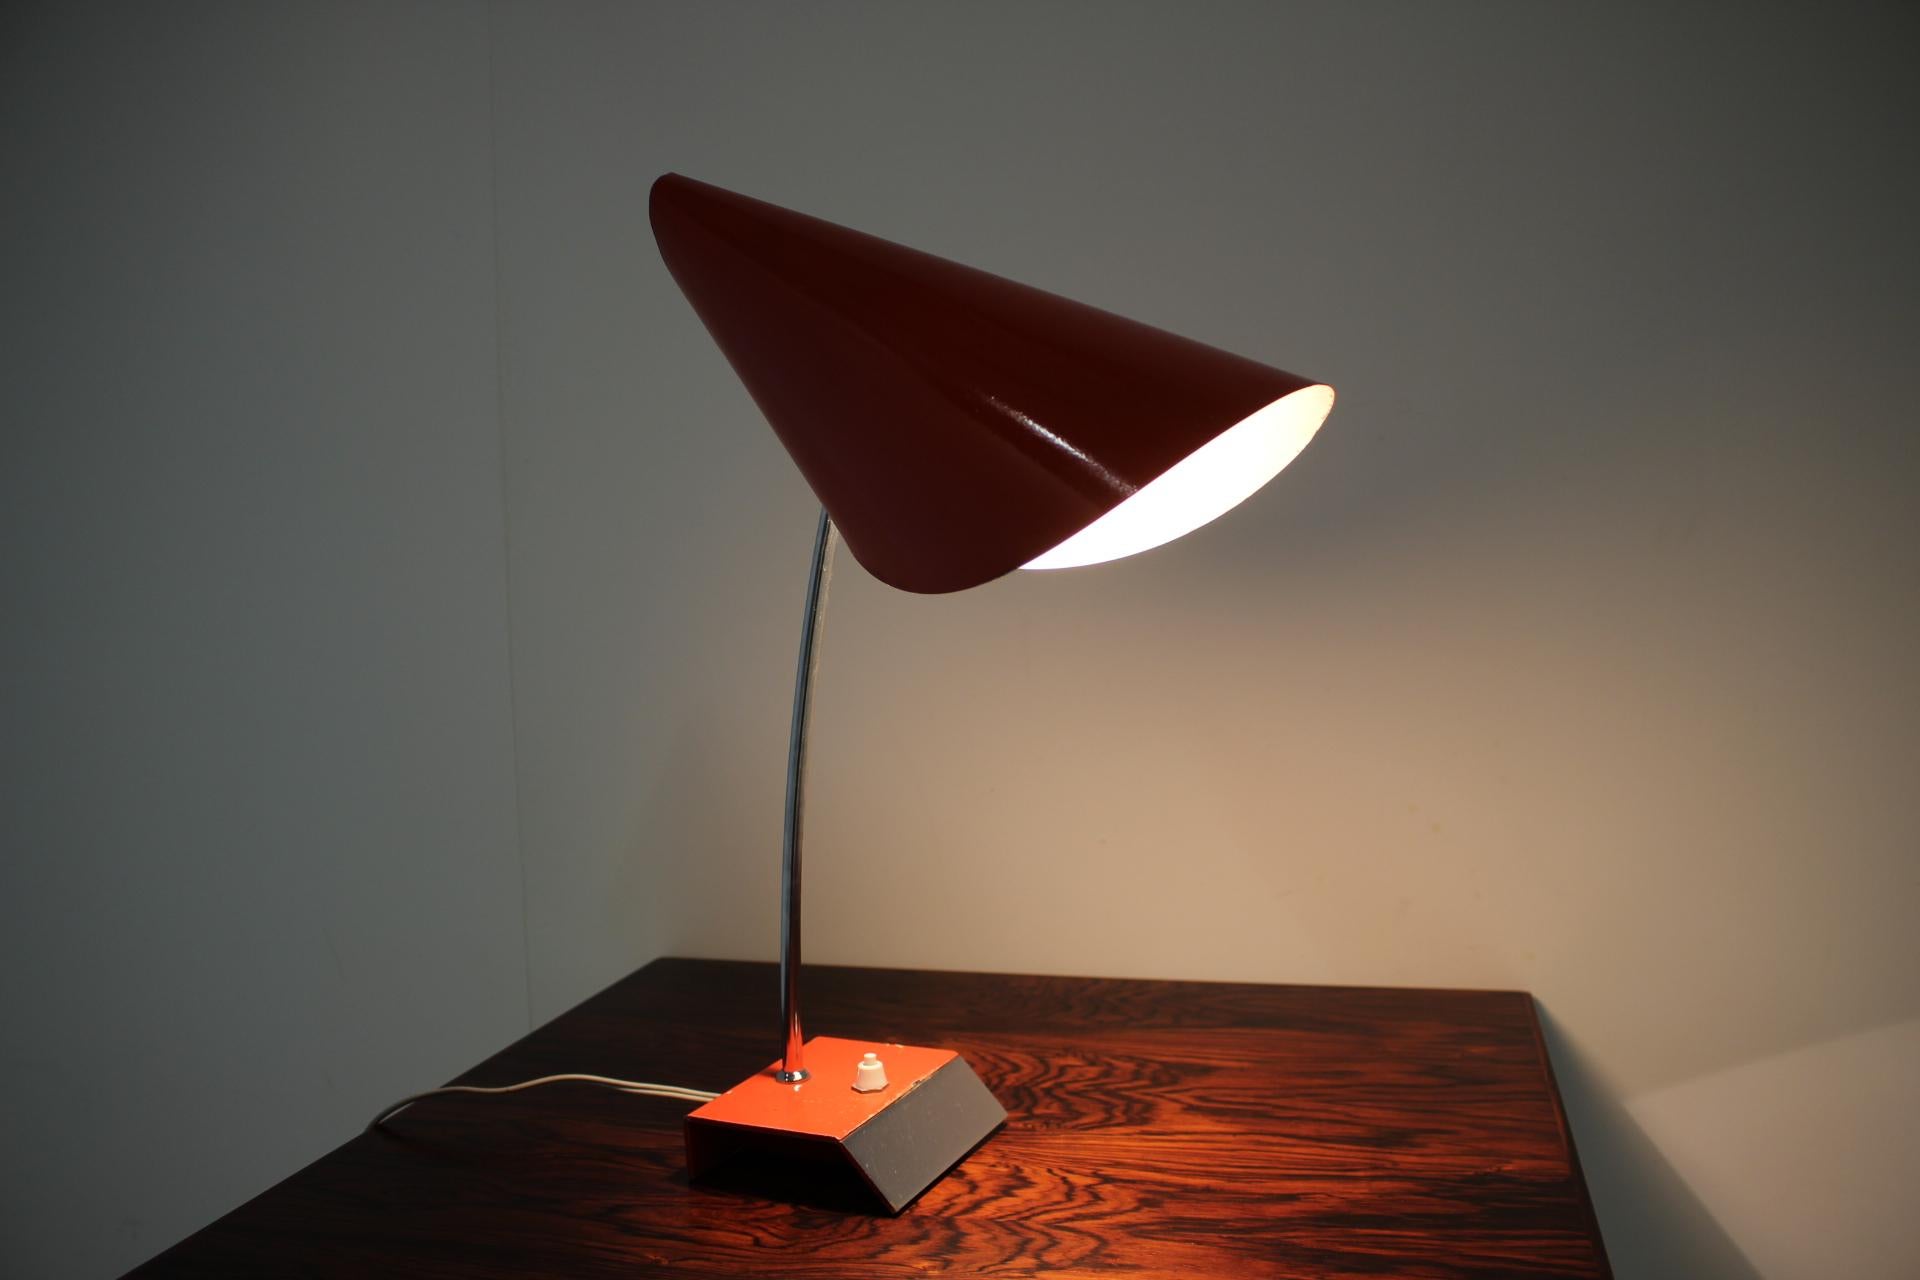 Steel Midcentury Red Table Lamp, Josef Hurka, 1950s For Sale